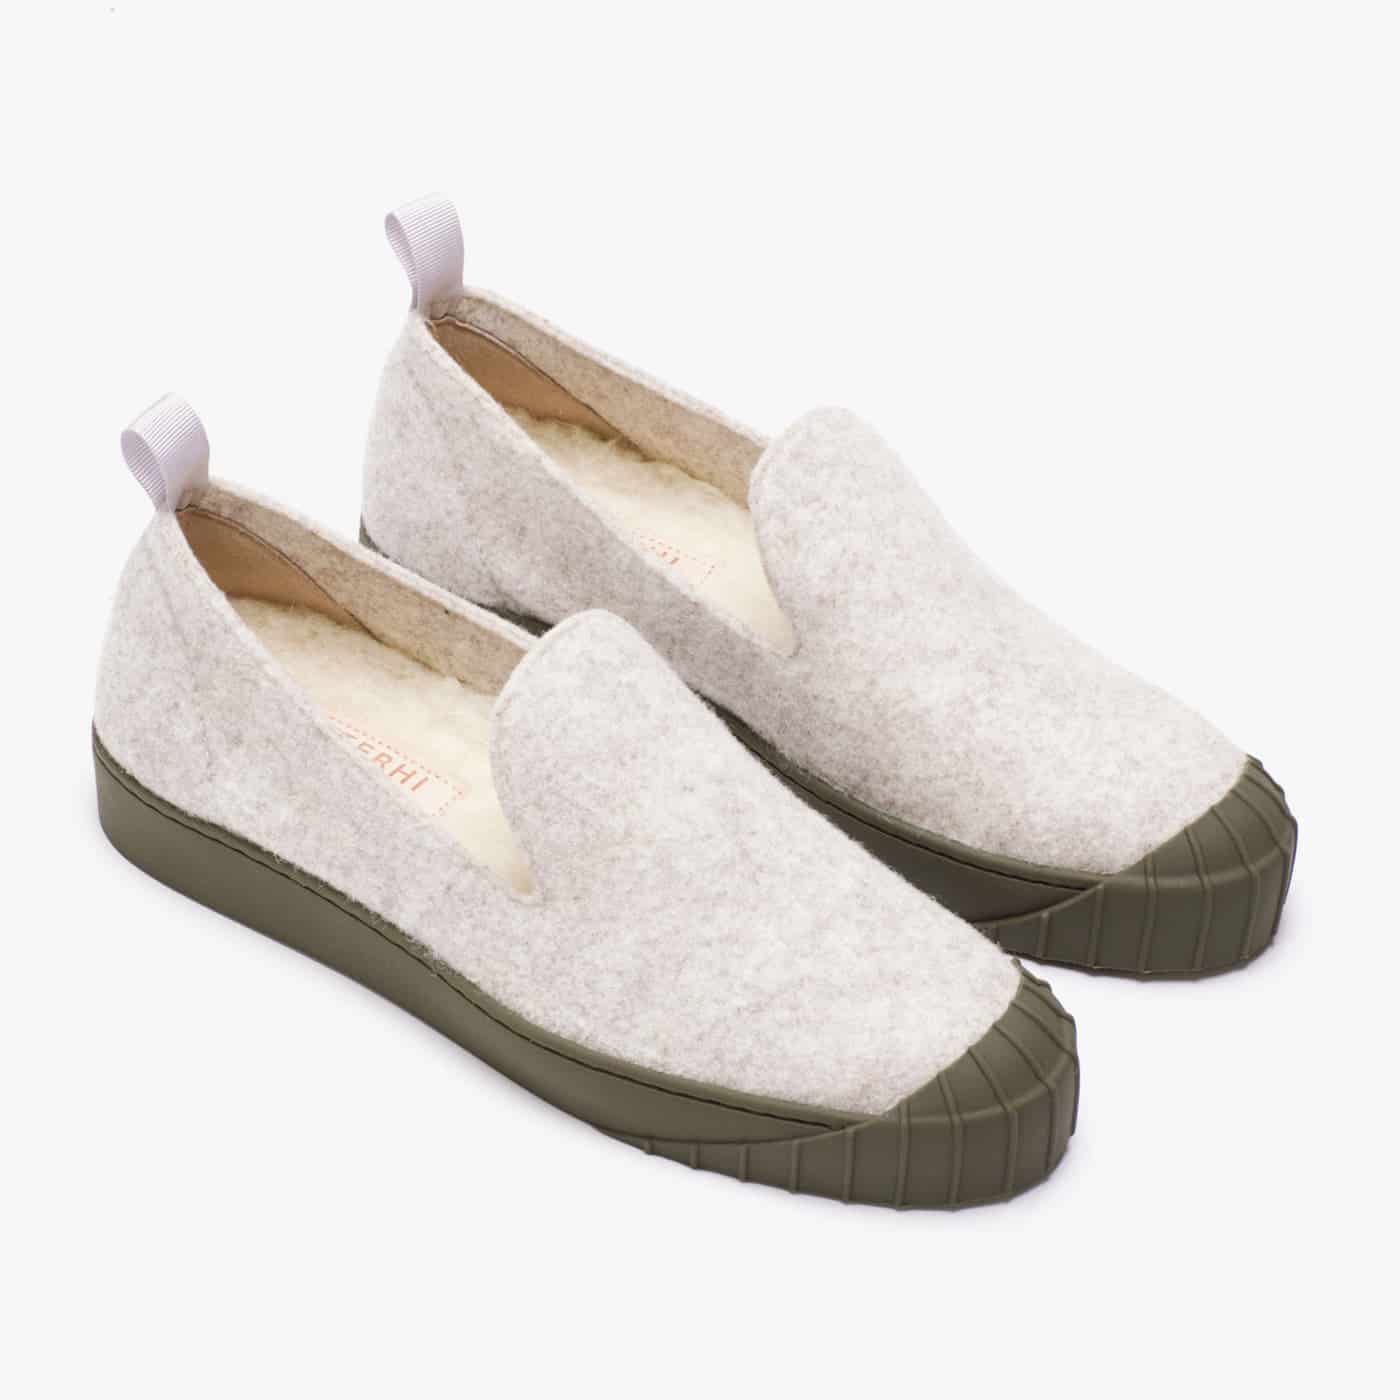 EMMI REWOOL SLIP-ON ICE - Terhi Polkki slip on shoes made from recycled materials